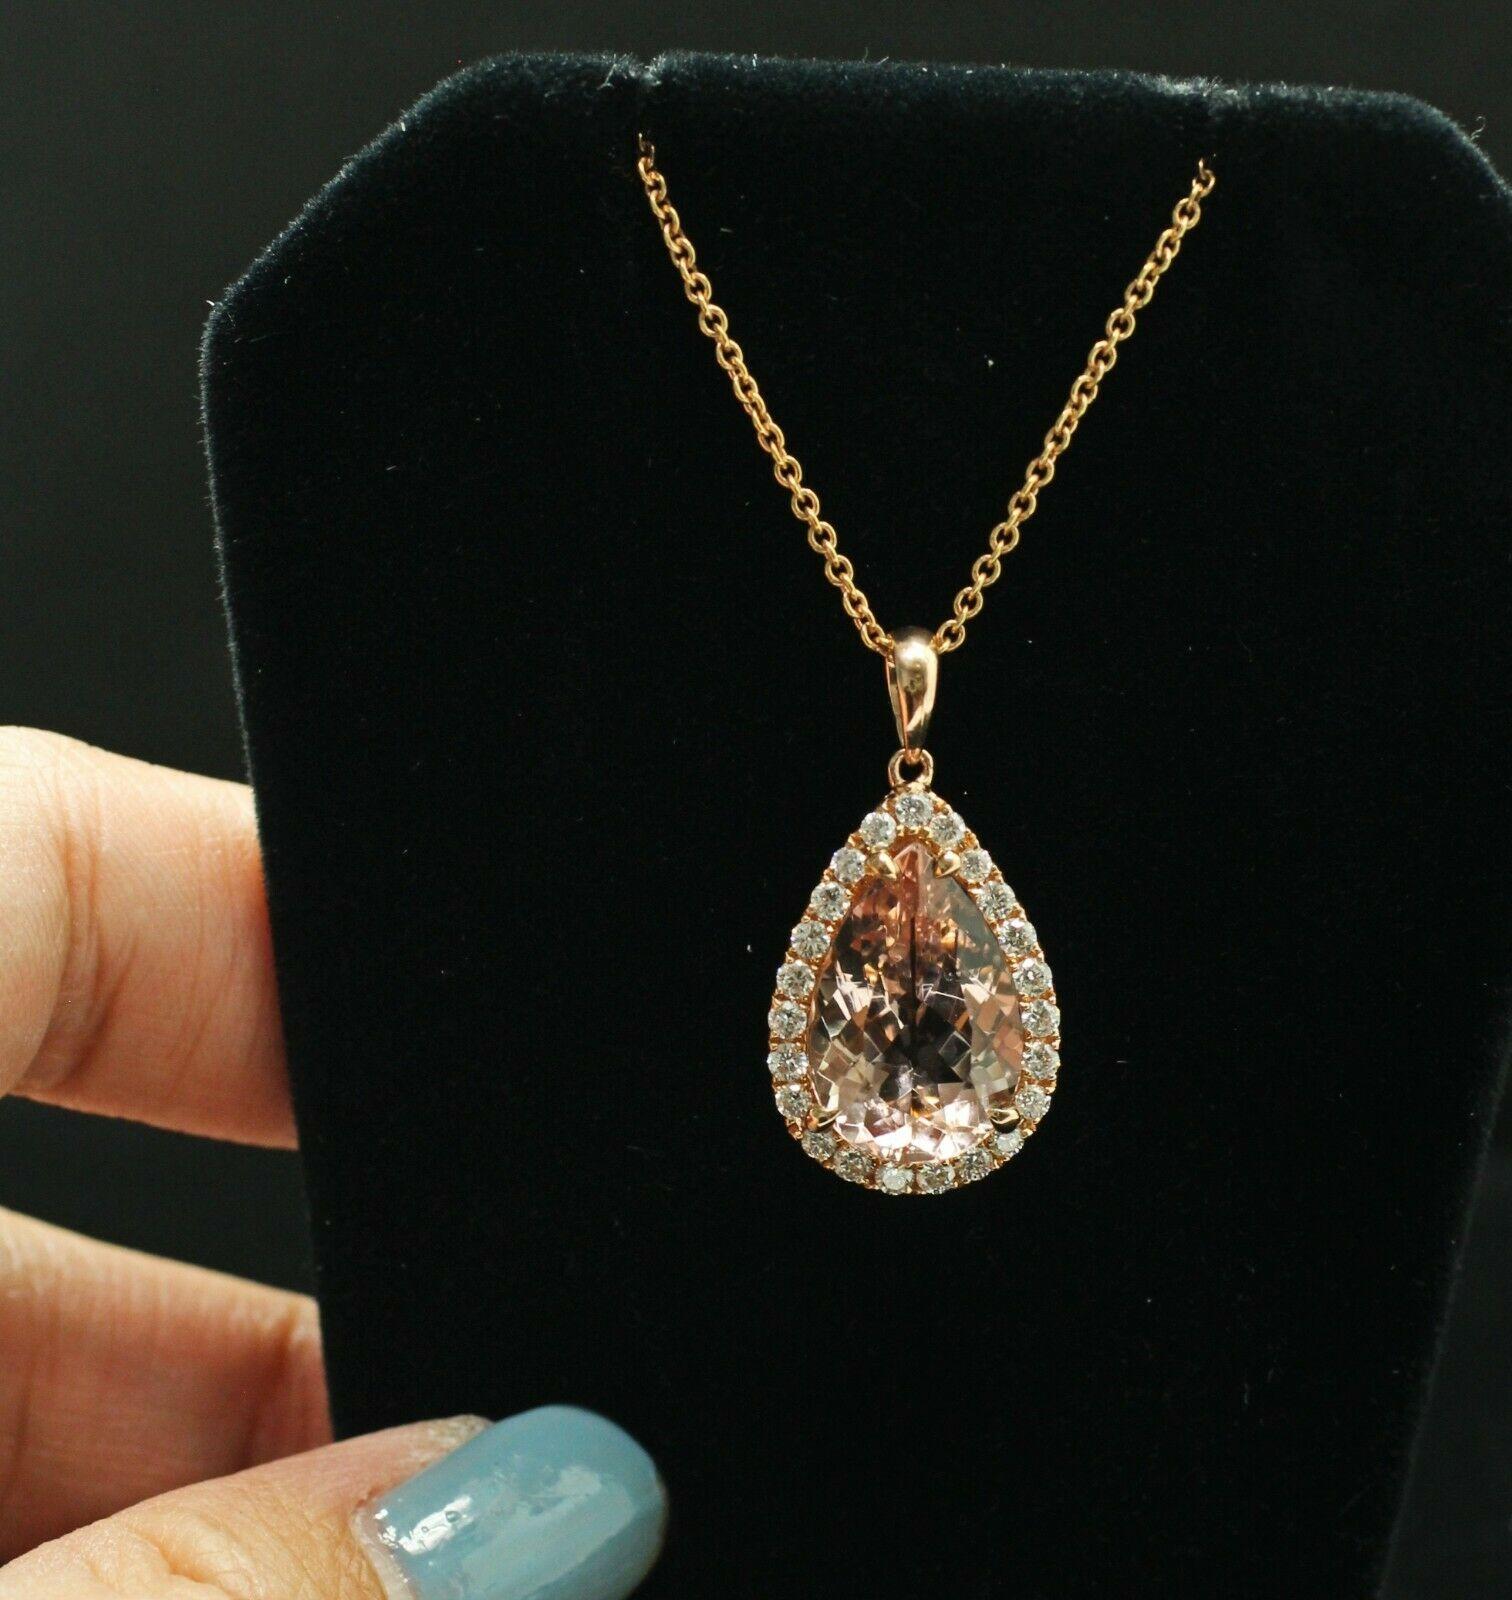  Surprise a special woman in your life with this large, breathtaking, statement halo morganite diamond necklace.This eye-catching pendant necklace features 0.46ct total weight of accent diamonds surrounding a 14.9mm-9.9mm pear cut Morganite, all set